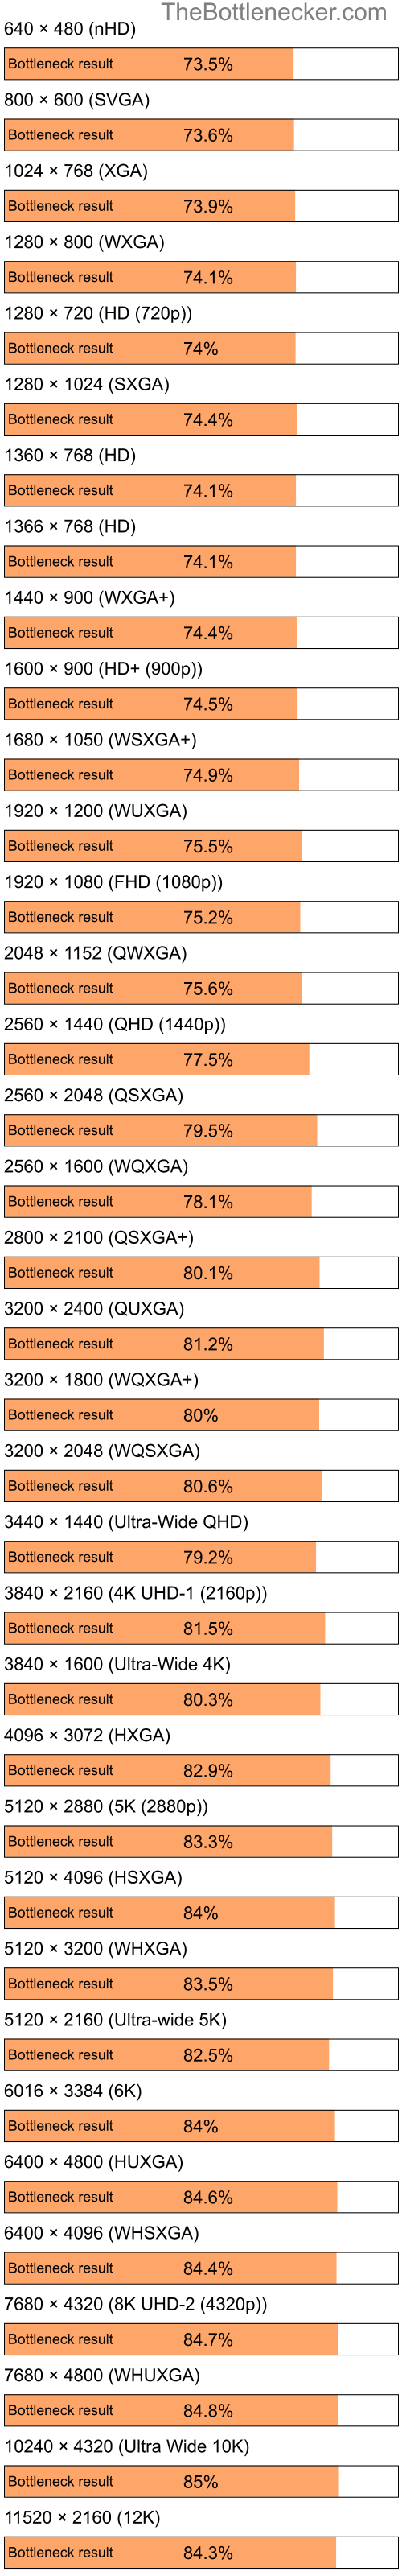 Bottleneck results by resolution for Intel Atom Z520 and AMD Mobility Radeon X1300 in General Tasks